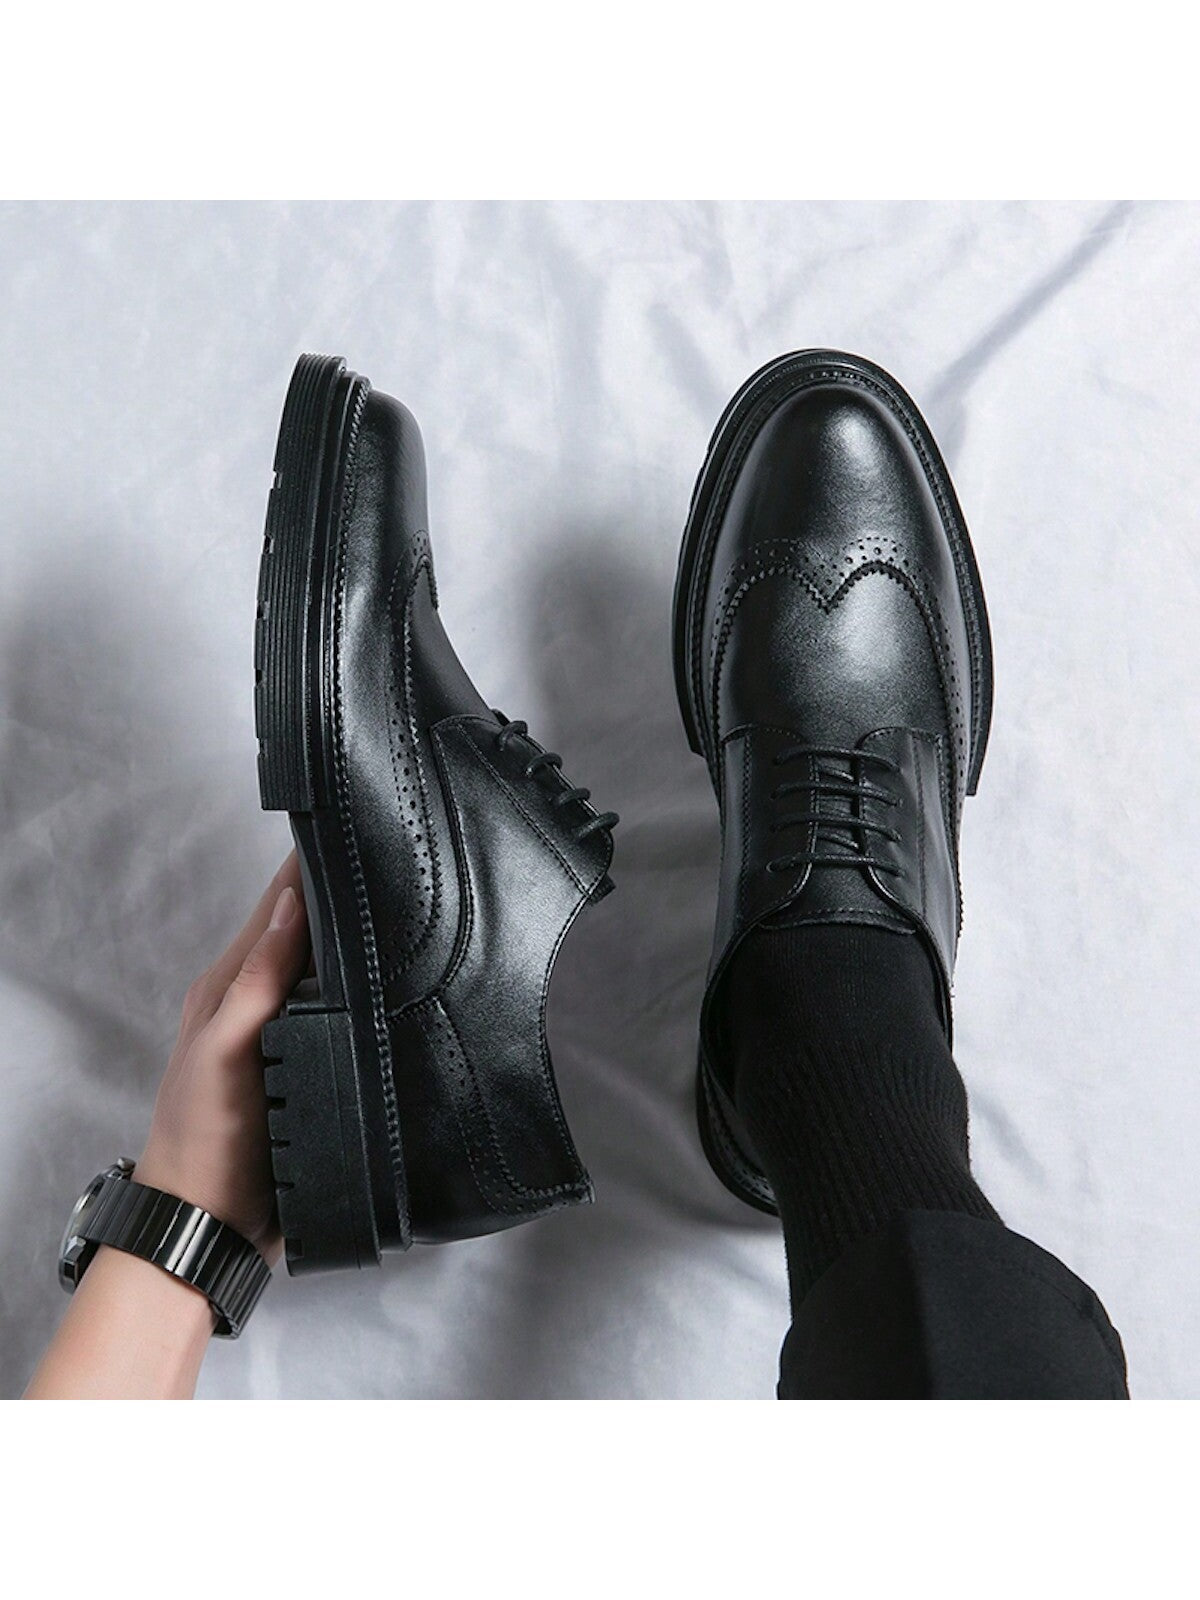 Men's Thick-Soled Height-Increasing Fashion Shoes Classic Lace-Up Leather Oxford Shoes With British Style Brogue Decoration For Streetwear & Casual Fashion